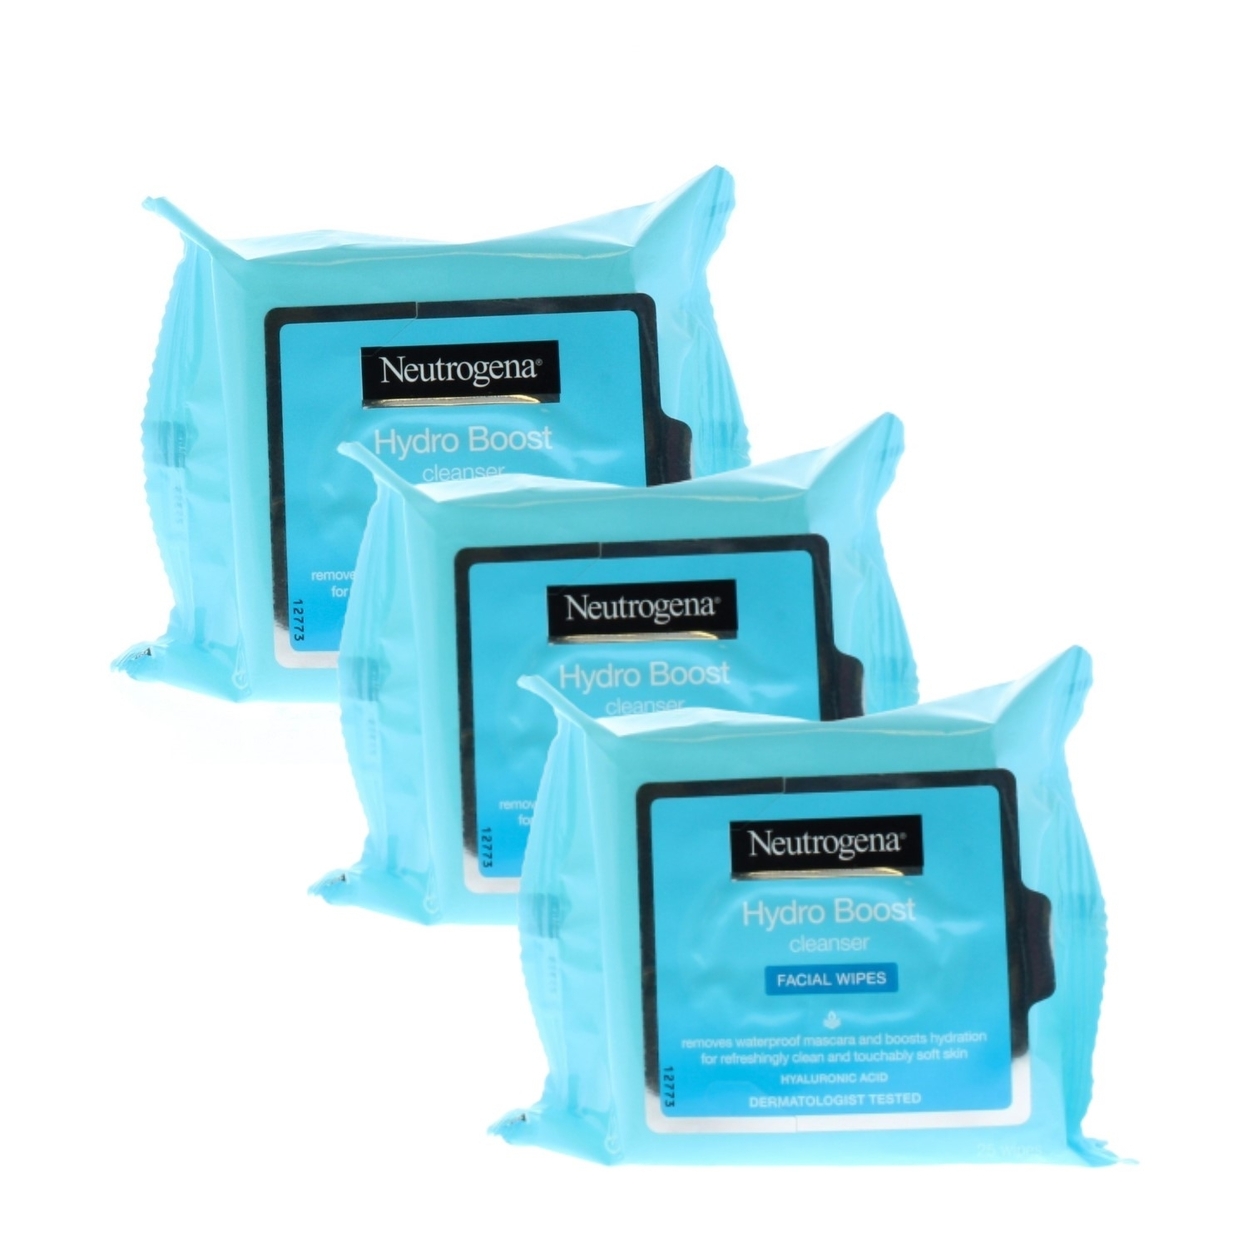 Neutrogena Hydro Boost Cleanser Facial Wipes (3 Packs Of 25 Wipes- Total 75 Wipes)